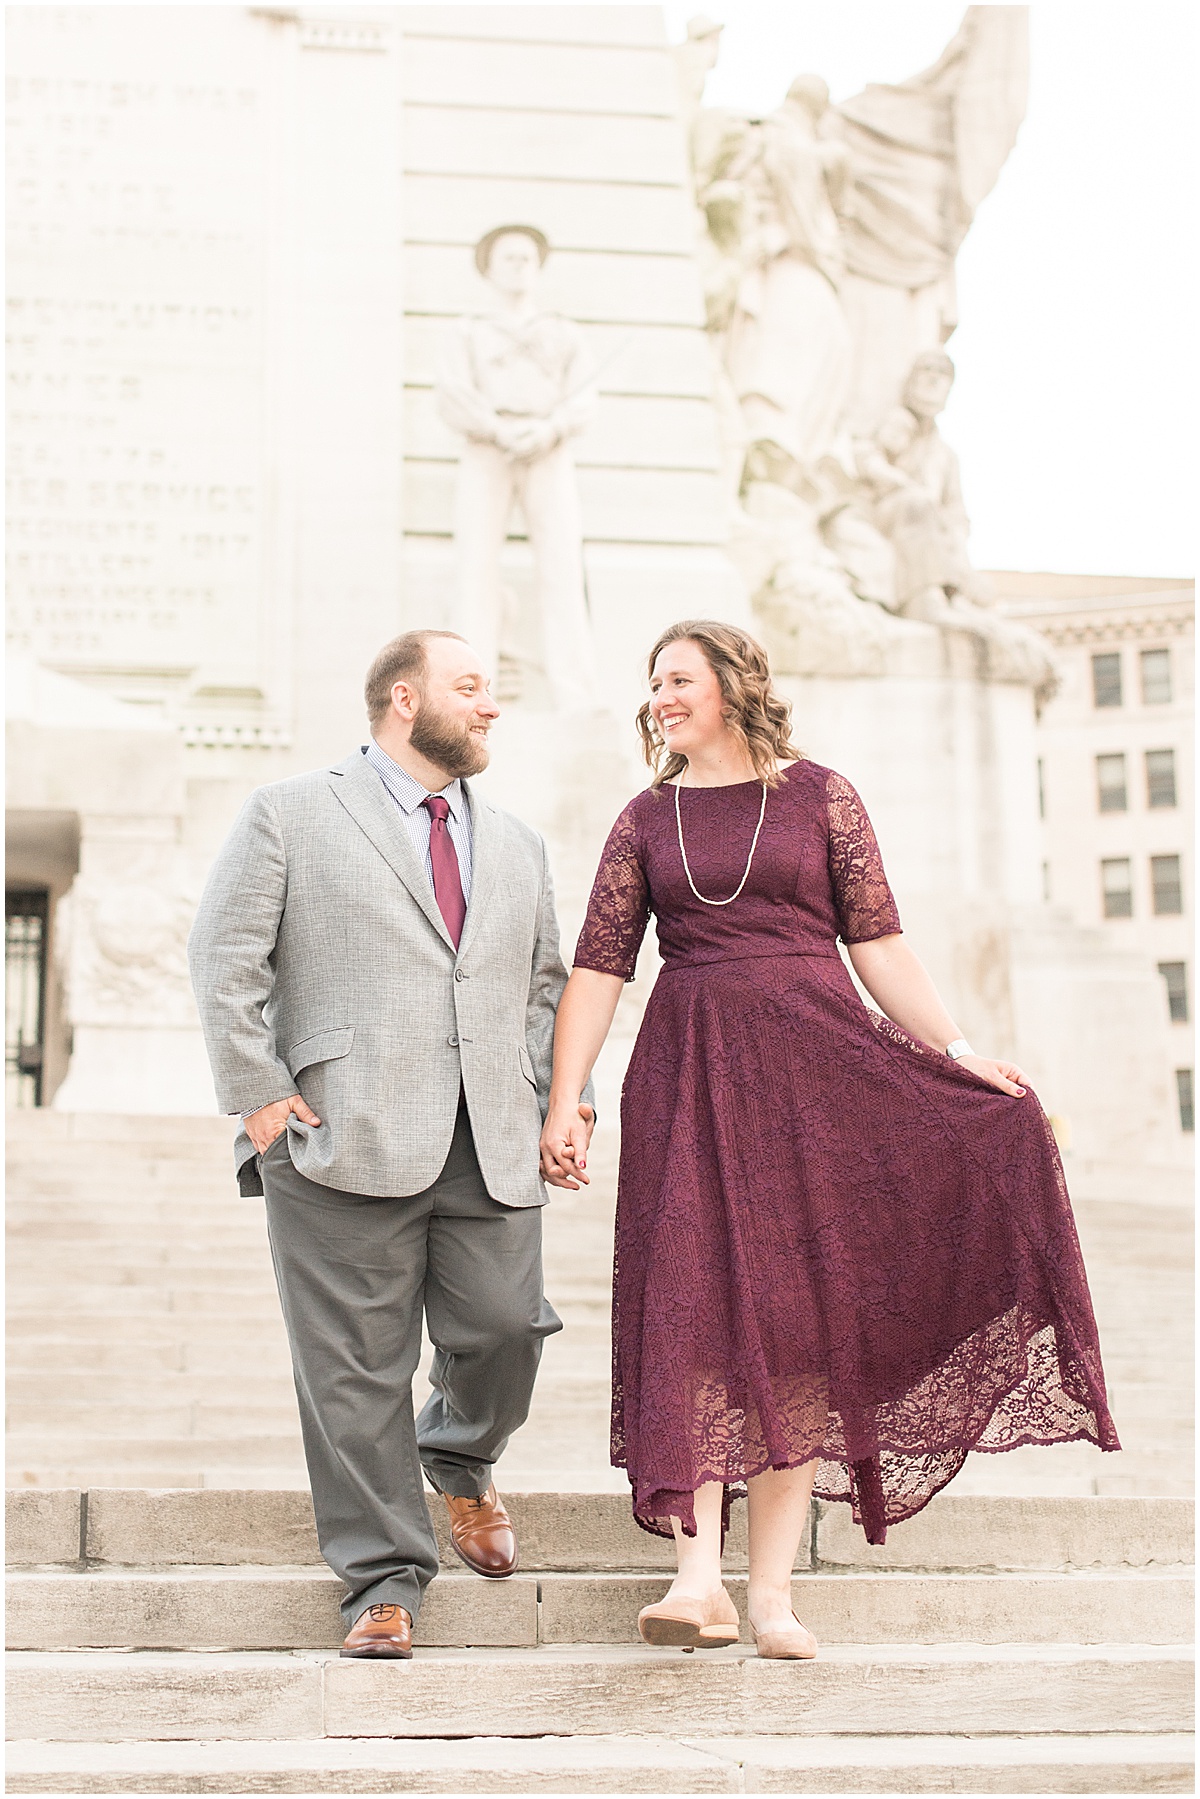 Summer engagement photos in downtown Indianapolis